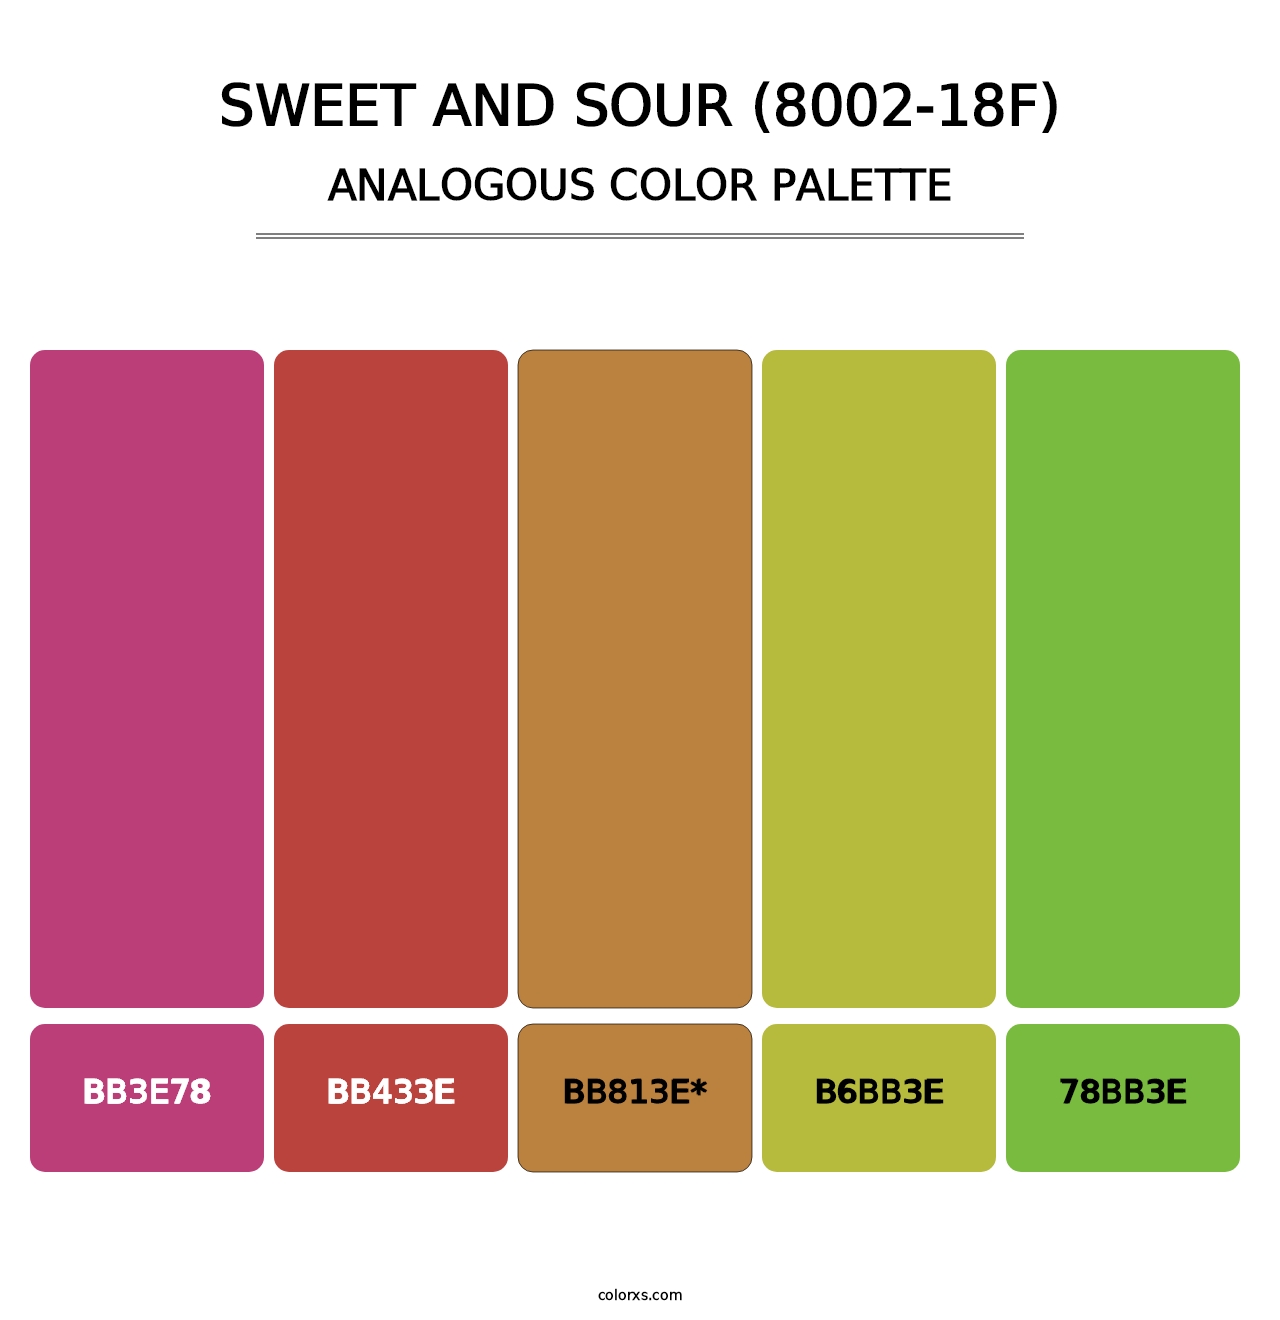 Sweet and Sour (8002-18F) - Analogous Color Palette